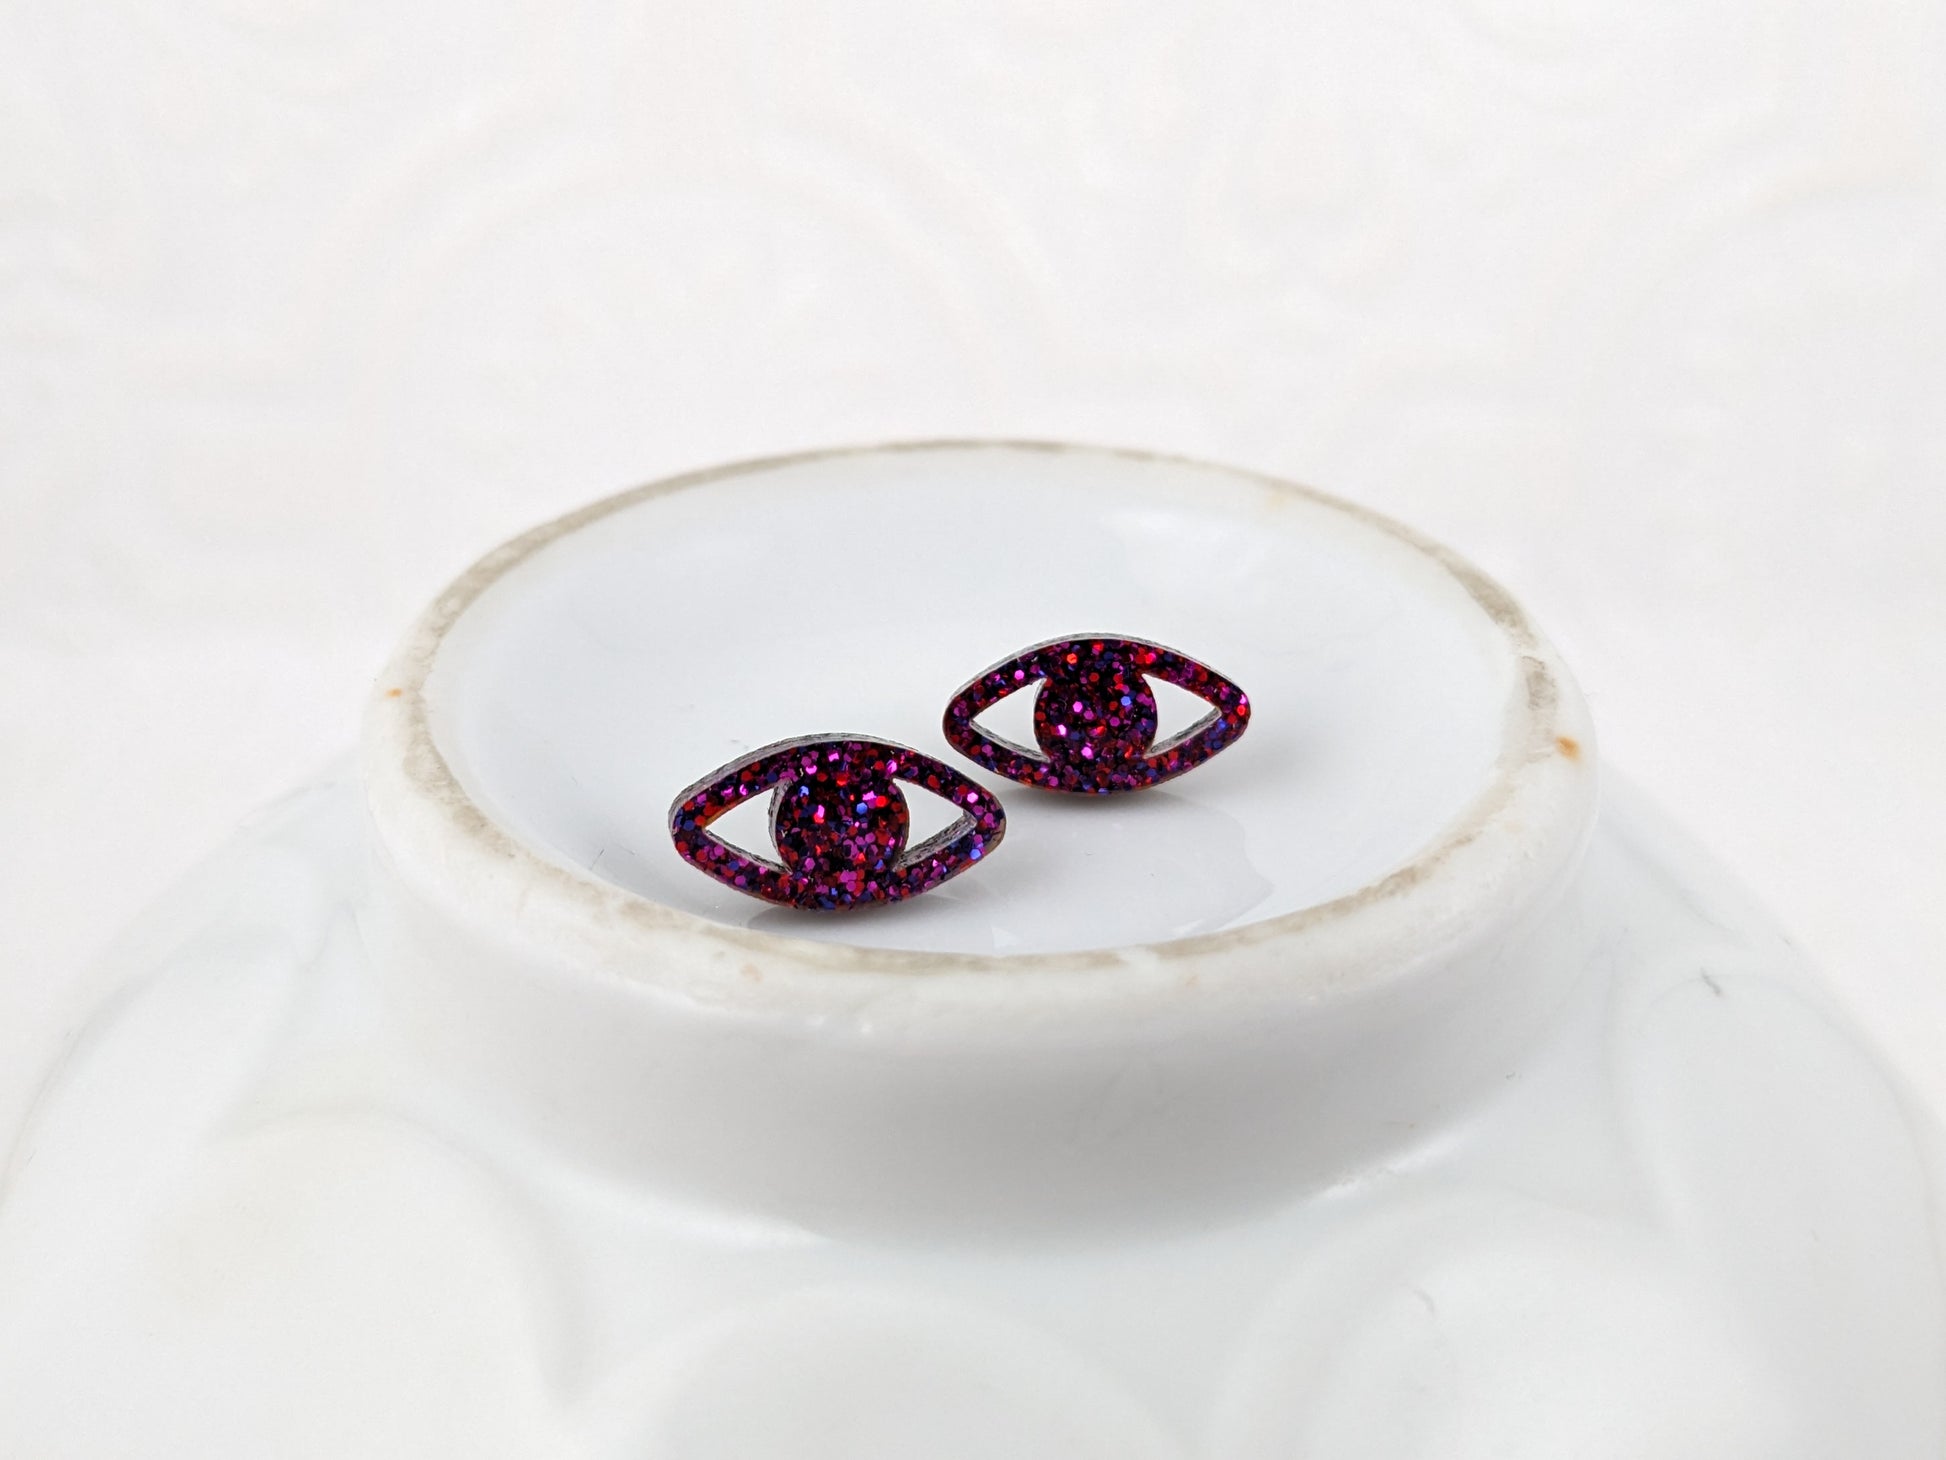 Eye shaped stud earrings made with ruby sparkle acrylic and stainless steel posts on vintage white dish